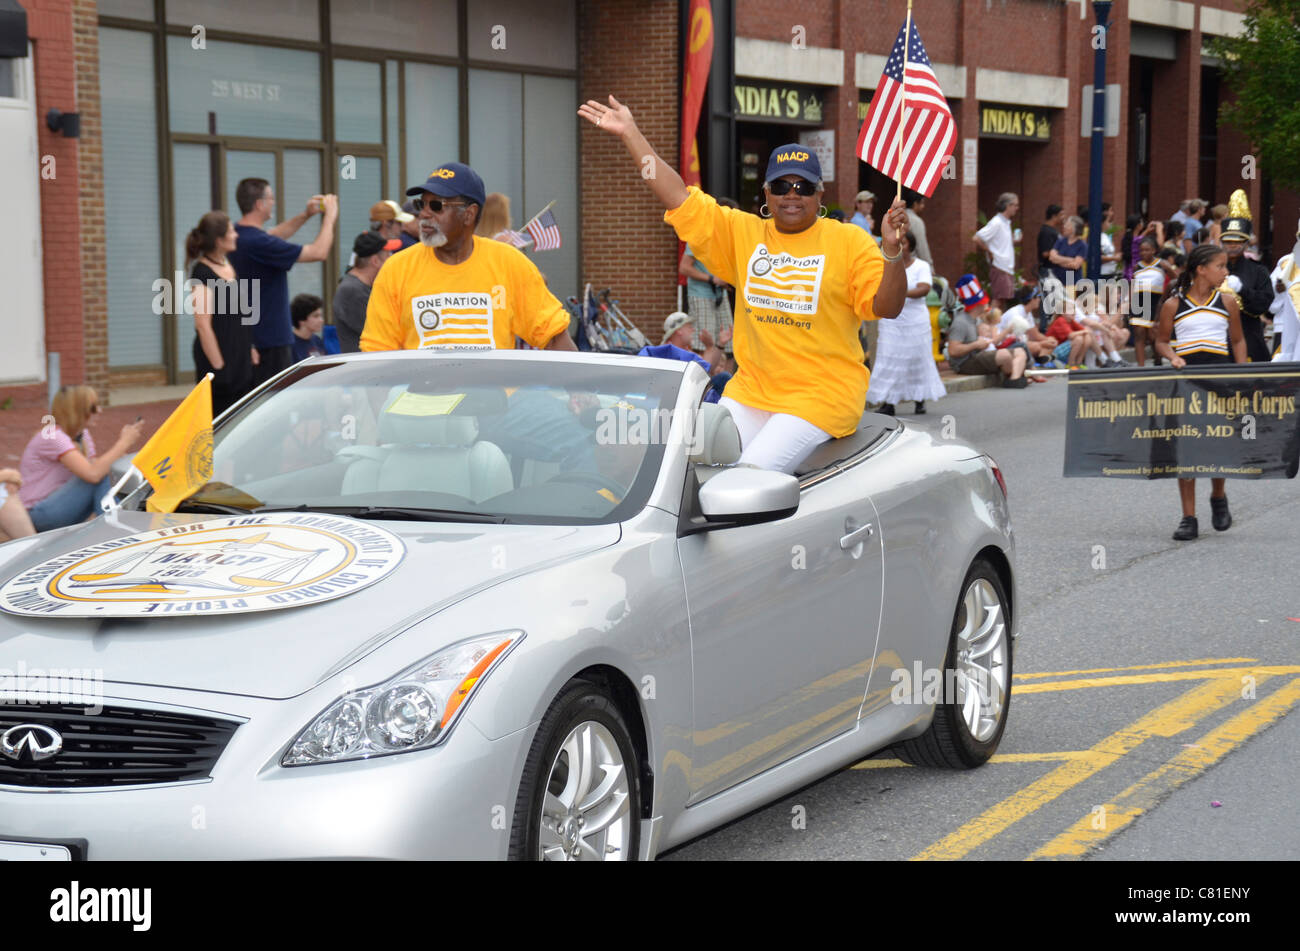 members of the Md NAACP in a July4 parade in Annapolis, Maryland Stock Photo